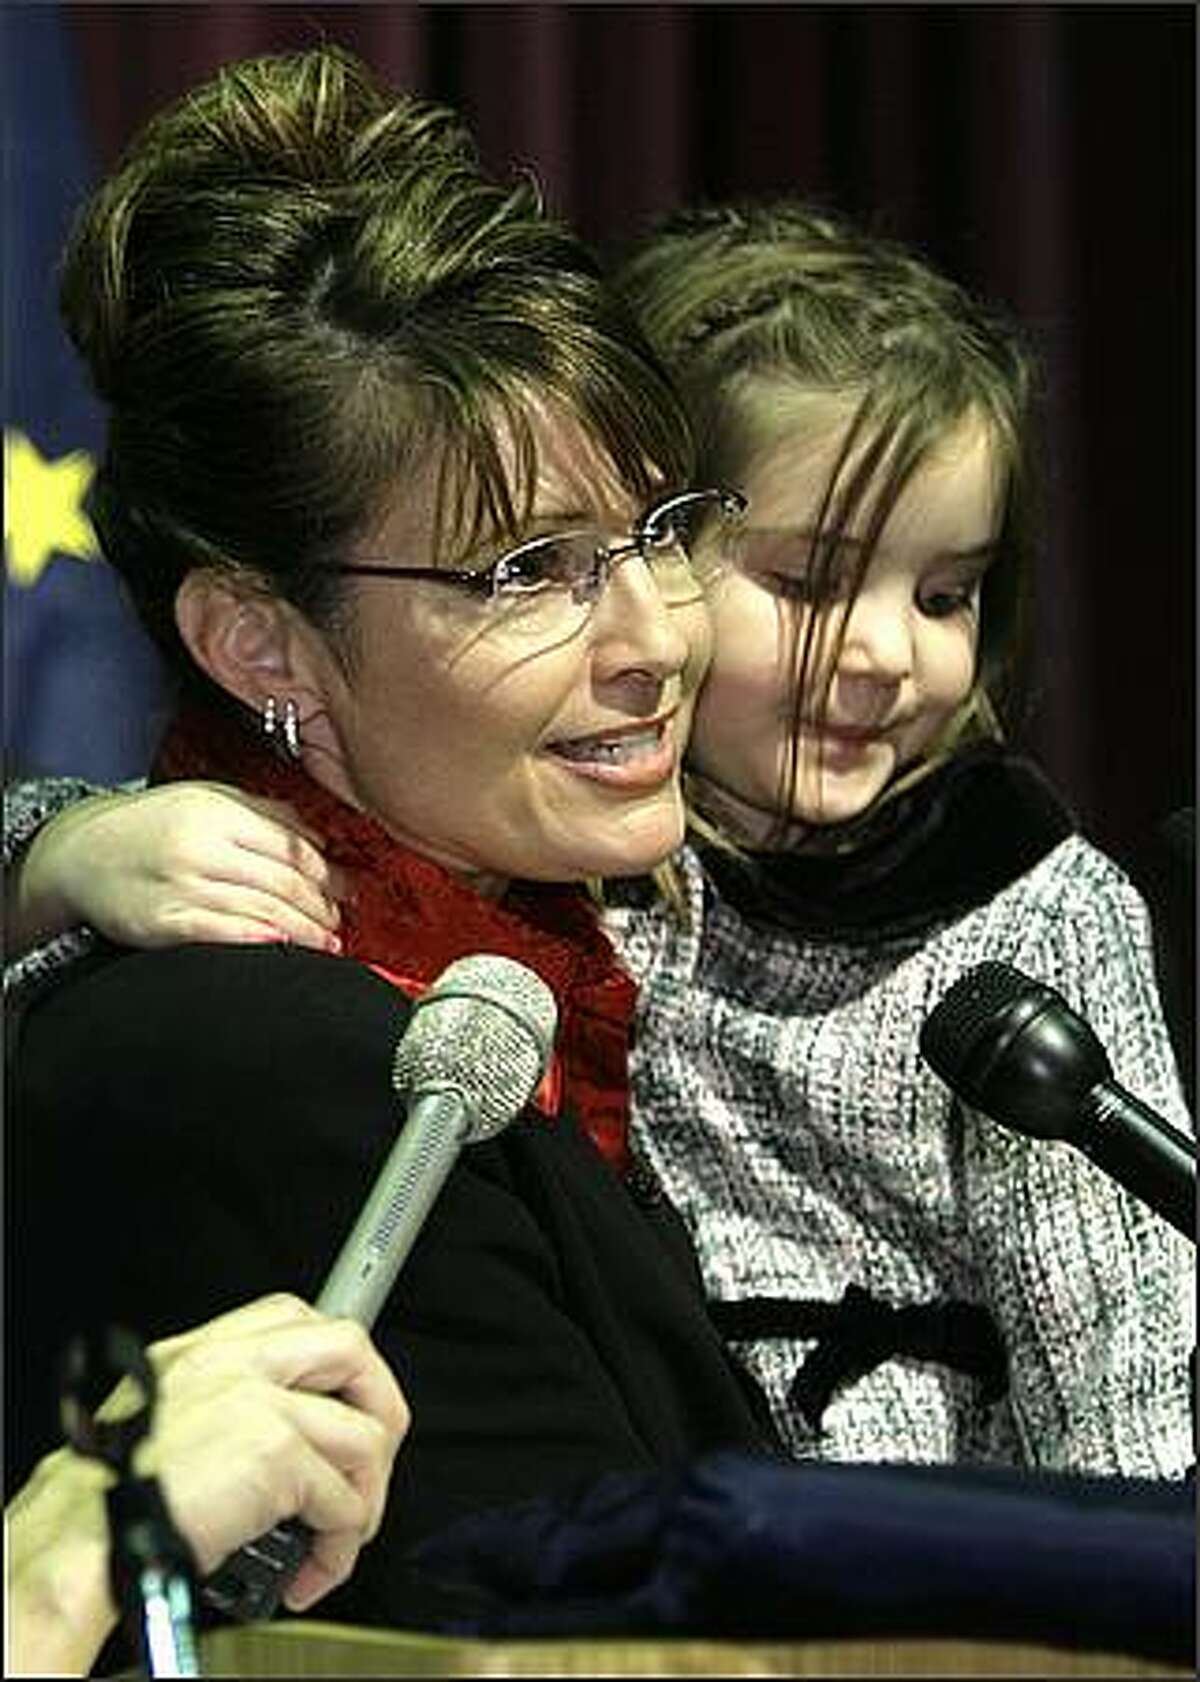 In this Nov. 8, 2006 file photo, then Governor-elect Sarah Palin holds her daughter Piper as she gives a victory speech in Anchorage, Alaska. John McCain tapped little-known Alaska Gov. AP Photo/Al Grillo